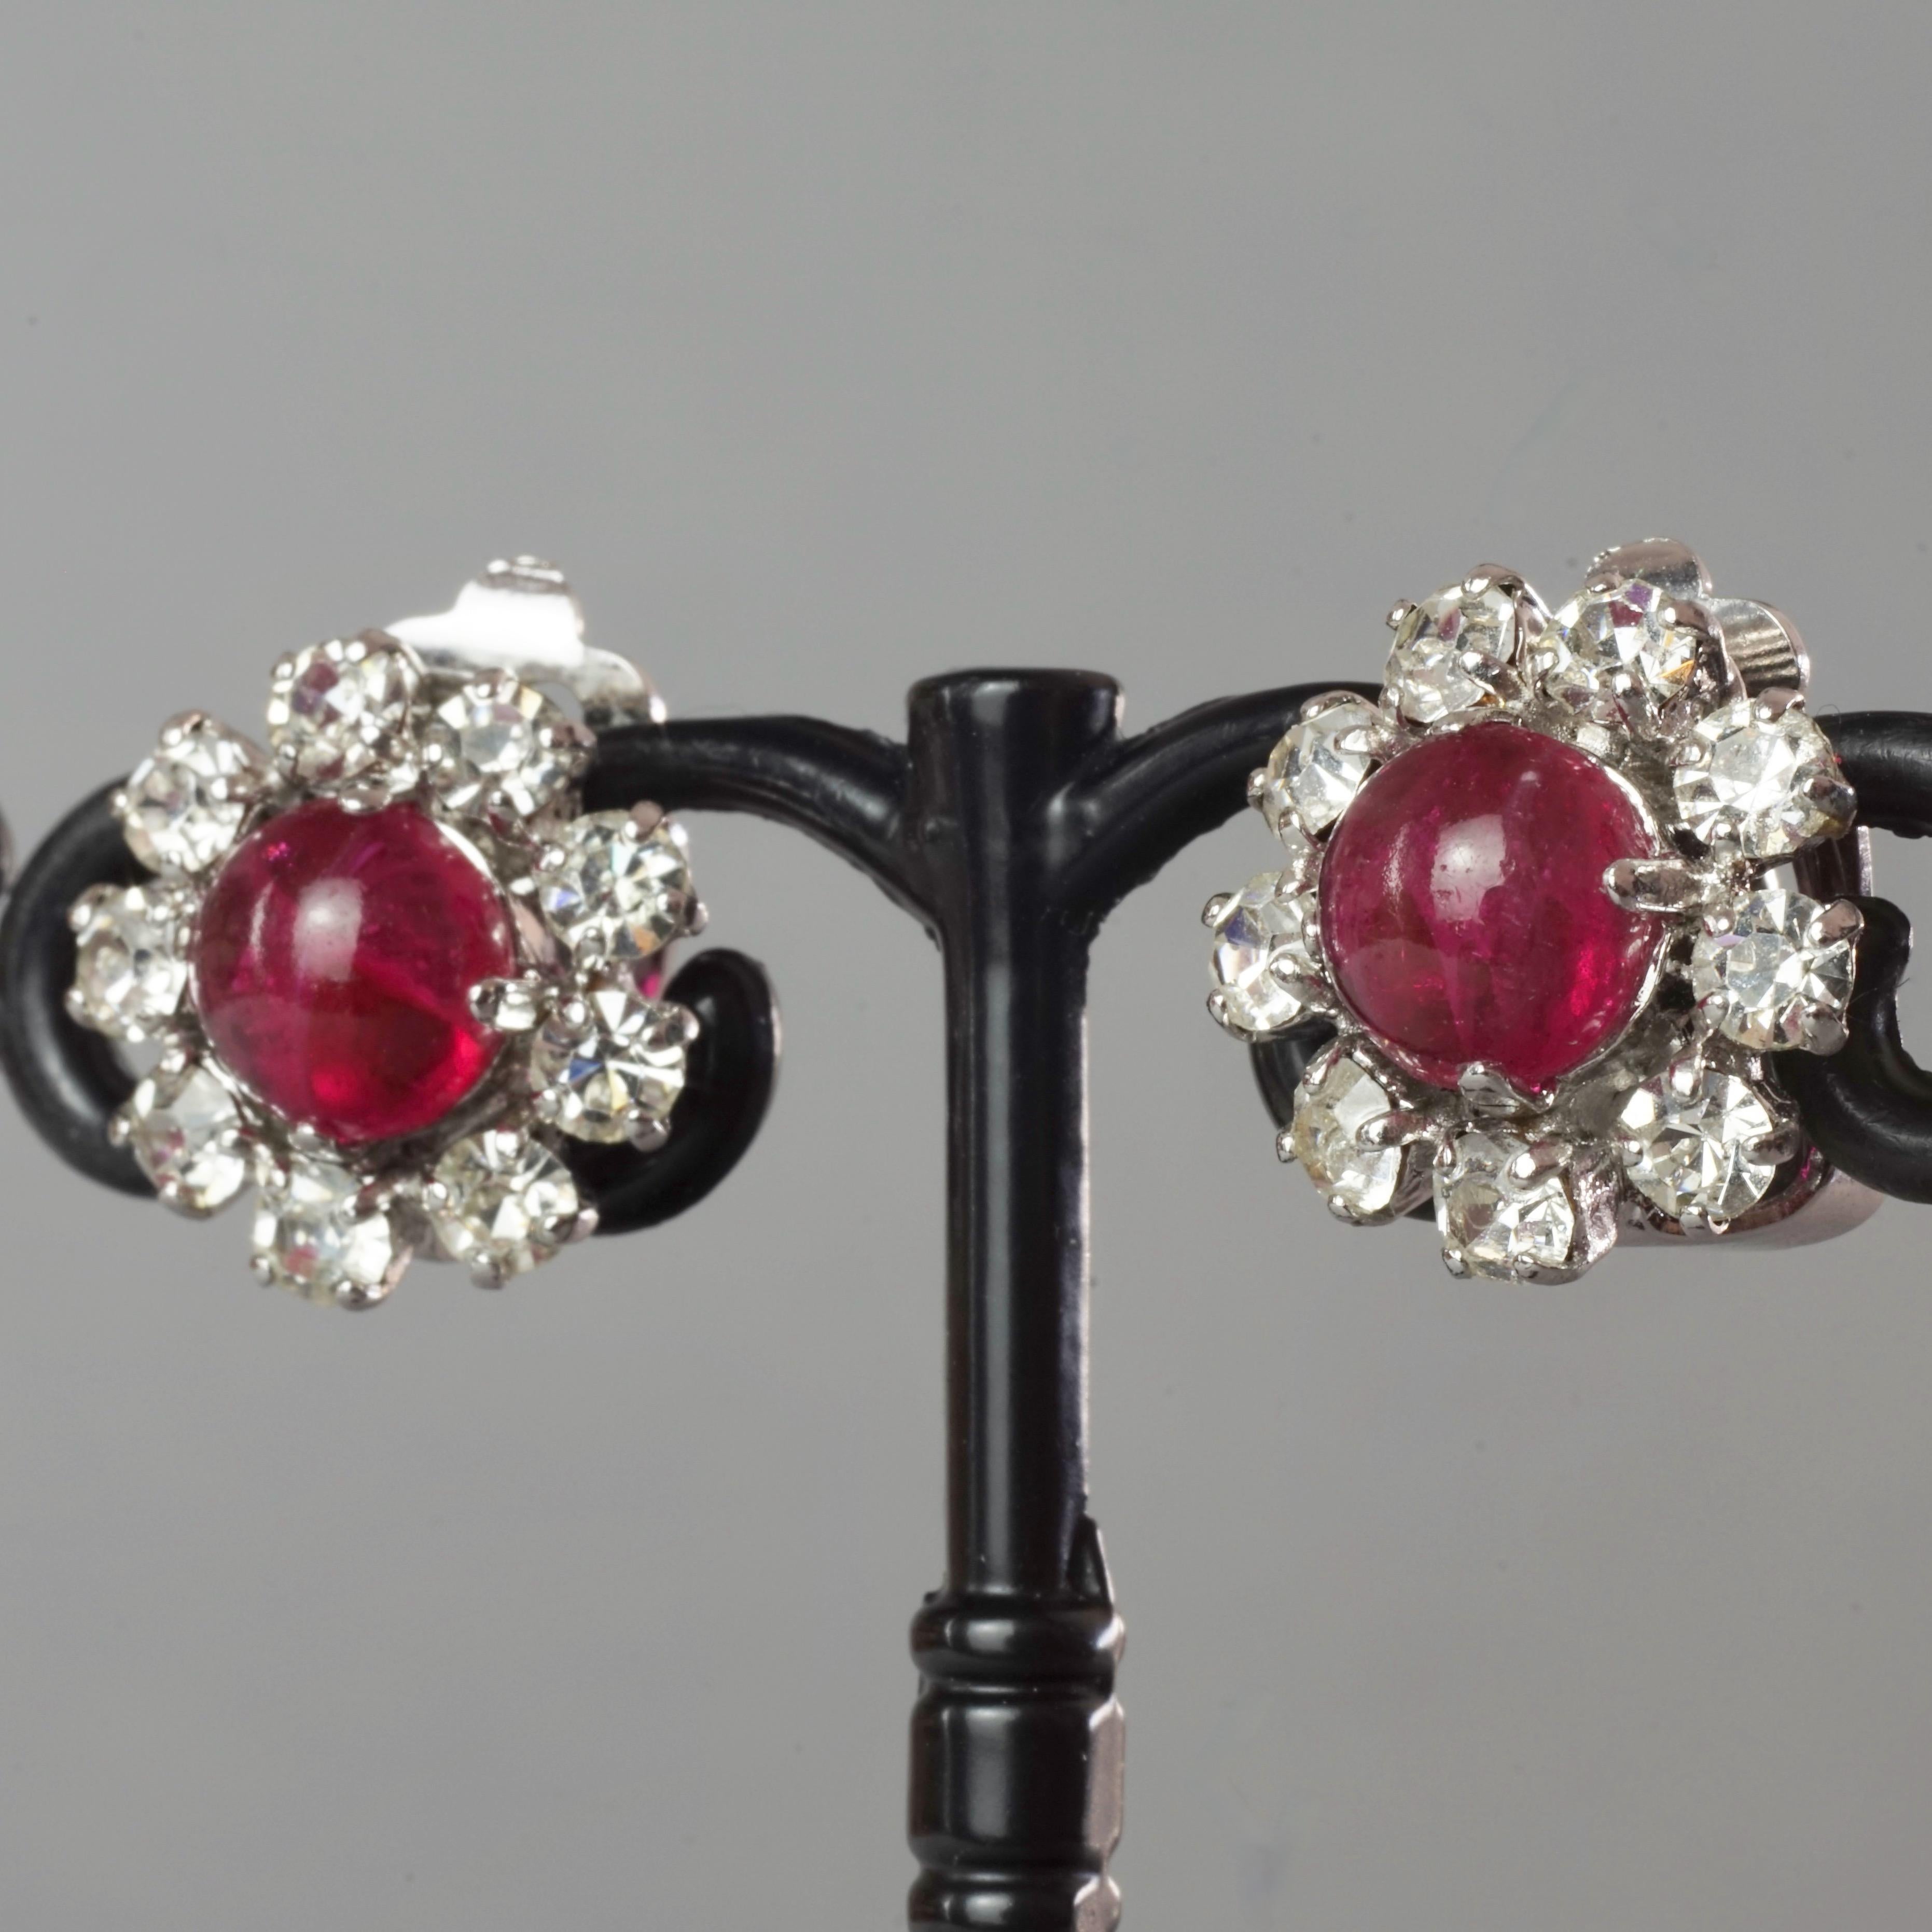 Vintage 1973 CHRISTIAN DIOR Red Glass Cabochon Rhinestone Earrings For Sale 1